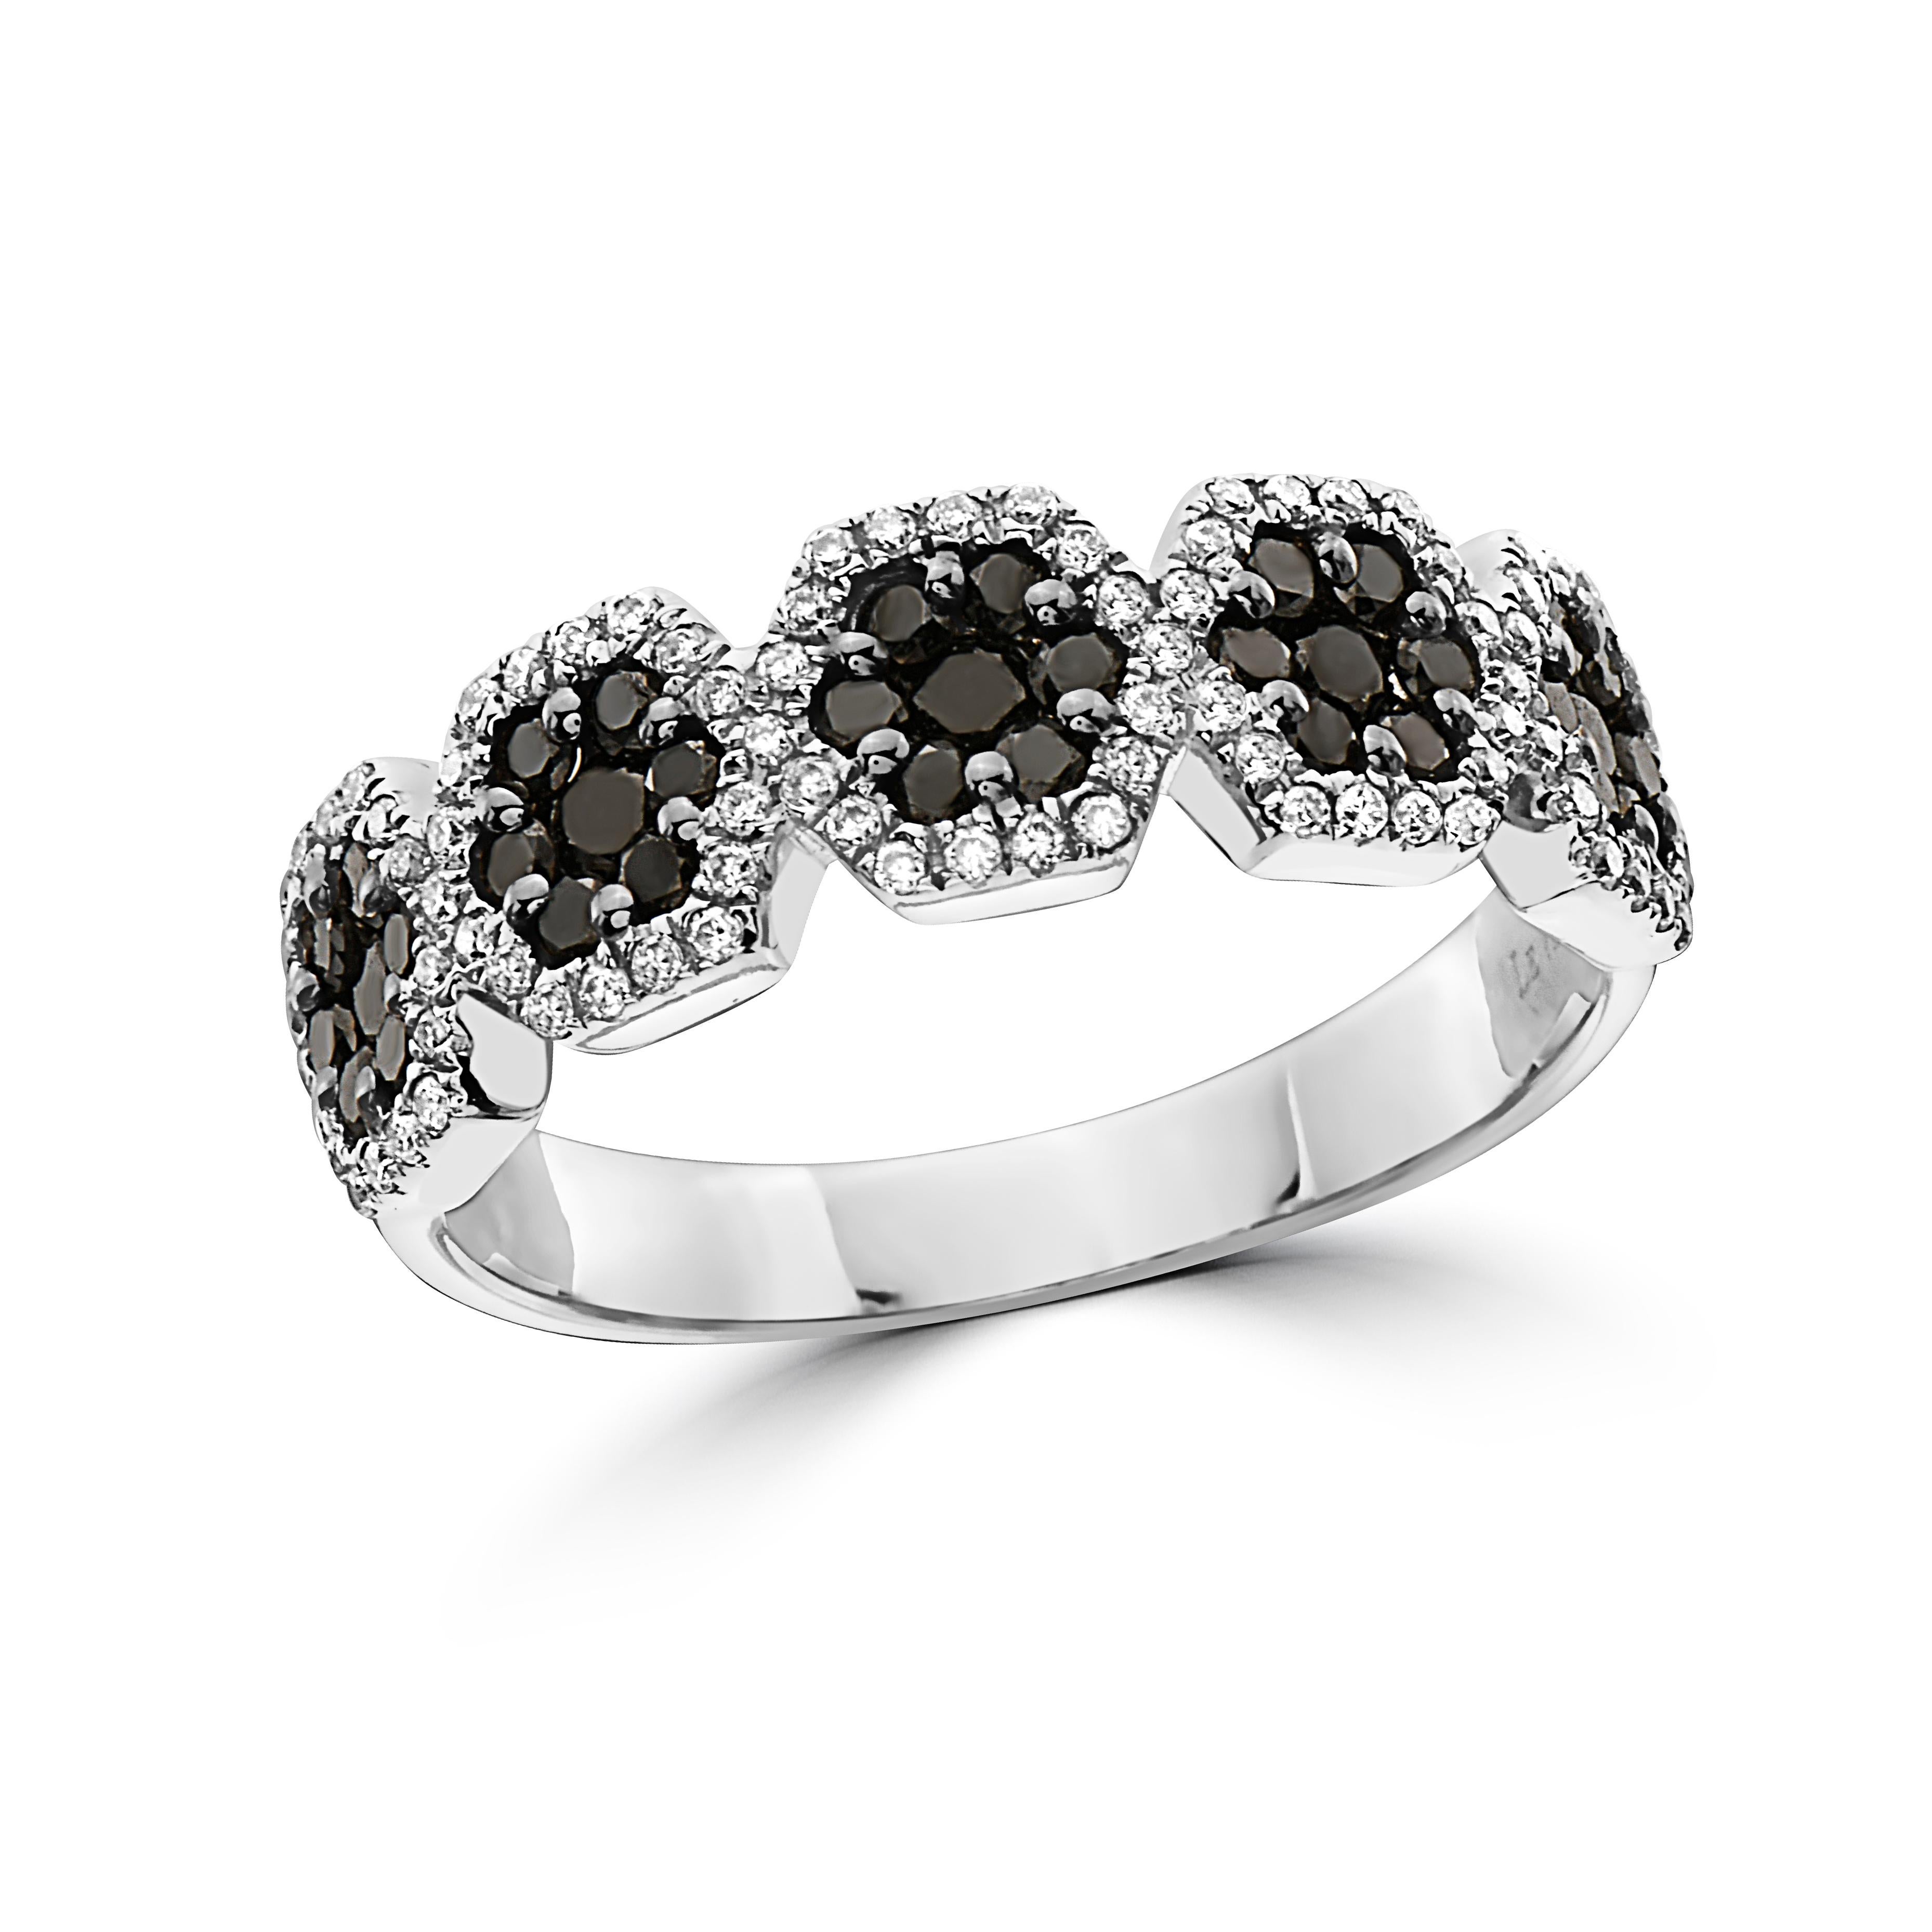 Levian Ring 3 4 Cts Black and White i S12 Natural Diamonds Set in 14K White Gold For Sale